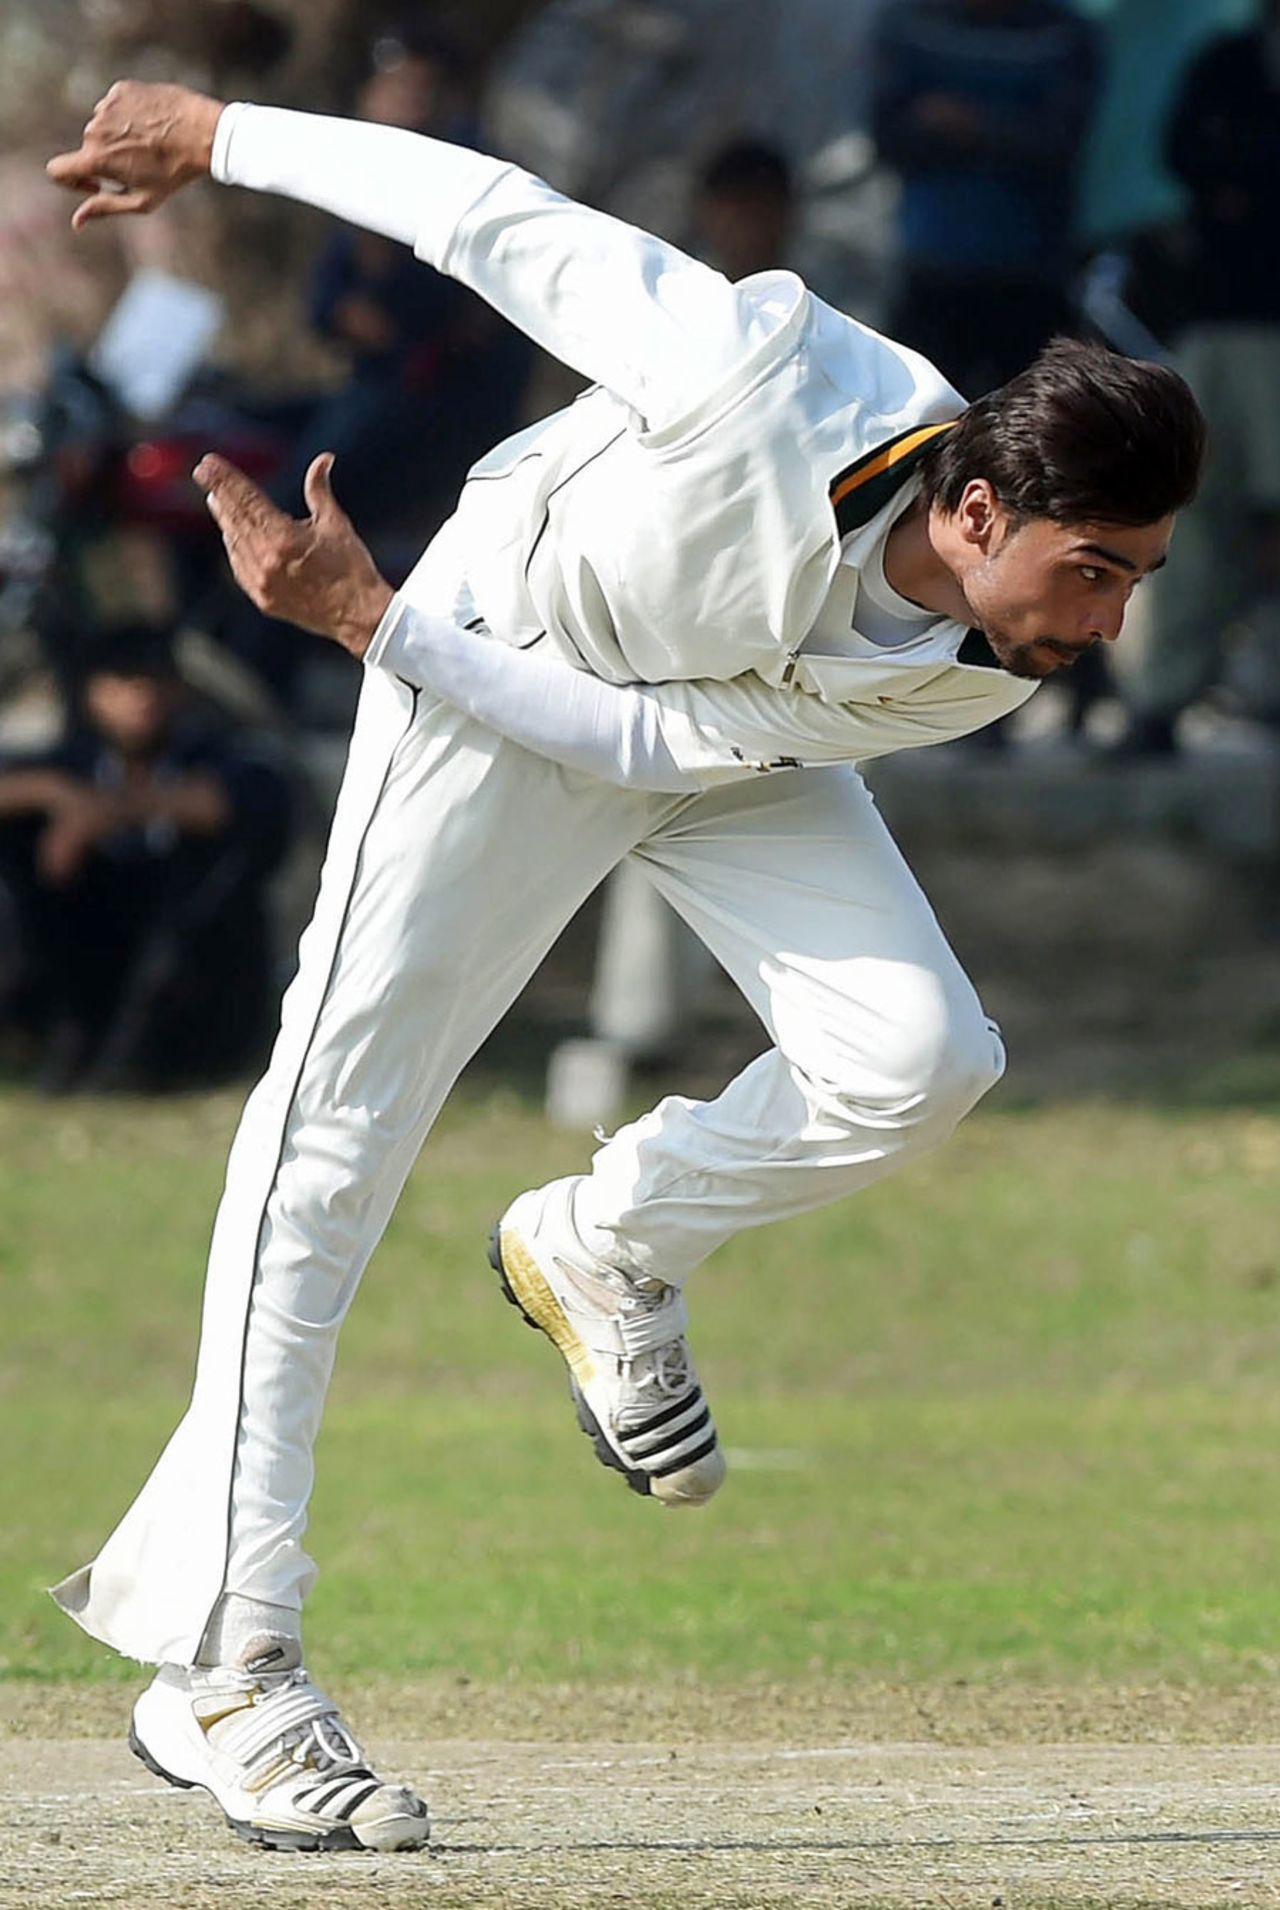 Mohammad Amir in his delivery stride during a league game, Lahore, February 10, 2015